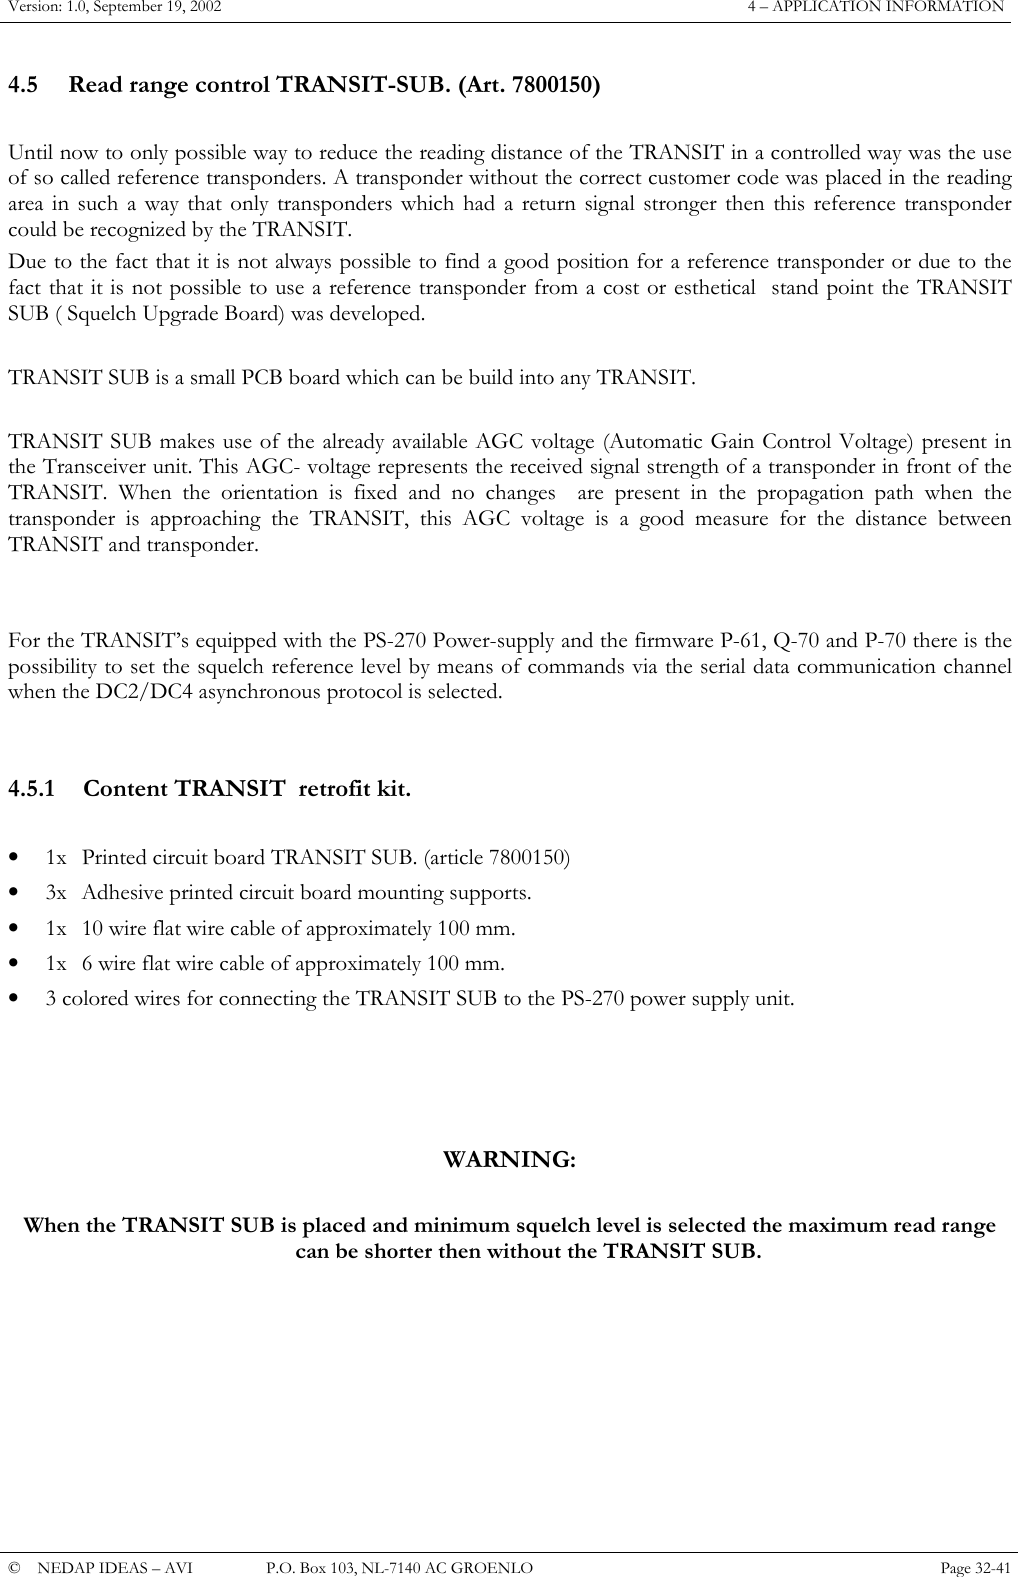 Version: 1.0, September 19, 2002  4 – APPLICATION INFORMATION 4.5  Read range control TRANSIT-SUB. (Art. 7800150)  Until now to only possible way to reduce the reading distance of the TRANSIT in a controlled way was the use of so called reference transponders. A transponder without the correct customer code was placed in the reading area in such a way that only transponders which had a return signal stronger then this reference transponder could be recognized by the TRANSIT. Due to the fact that it is not always possible to find a good position for a reference transponder or due to the fact that it is not possible to use a reference transponder from a cost or esthetical  stand point the TRANSIT SUB ( Squelch Upgrade Board) was developed.  TRANSIT SUB is a small PCB board which can be build into any TRANSIT.  TRANSIT SUB makes use of the already available AGC voltage (Automatic Gain Control Voltage) present in the Transceiver unit. This AGC- voltage represents the received signal strength of a transponder in front of the TRANSIT. When the orientation is fixed and no changes  are present in the propagation path when the transponder is approaching the TRANSIT, this AGC voltage is a good measure for the distance between TRANSIT and transponder.   For the TRANSIT’s equipped with the PS-270 Power-supply and the firmware P-61, Q-70 and P-70 there is the possibility to set the squelch reference level by means of commands via the serial data communication channel when the DC2/DC4 asynchronous protocol is selected.   4.5.1  Content TRANSIT  retrofit kit.  •  1x  Printed circuit board TRANSIT SUB. (article 7800150) •  3x  Adhesive printed circuit board mounting supports. •  1x  10 wire flat wire cable of approximately 100 mm. •  1x  6 wire flat wire cable of approximately 100 mm. •  3 colored wires for connecting the TRANSIT SUB to the PS-270 power supply unit.     WARNING:  When the TRANSIT SUB is placed and minimum squelch level is selected the maximum read range can be shorter then without the TRANSIT SUB.       ©  NEDAP IDEAS – AVI   P.O. Box 103, NL-7140 AC GROENLO Page 32-41   